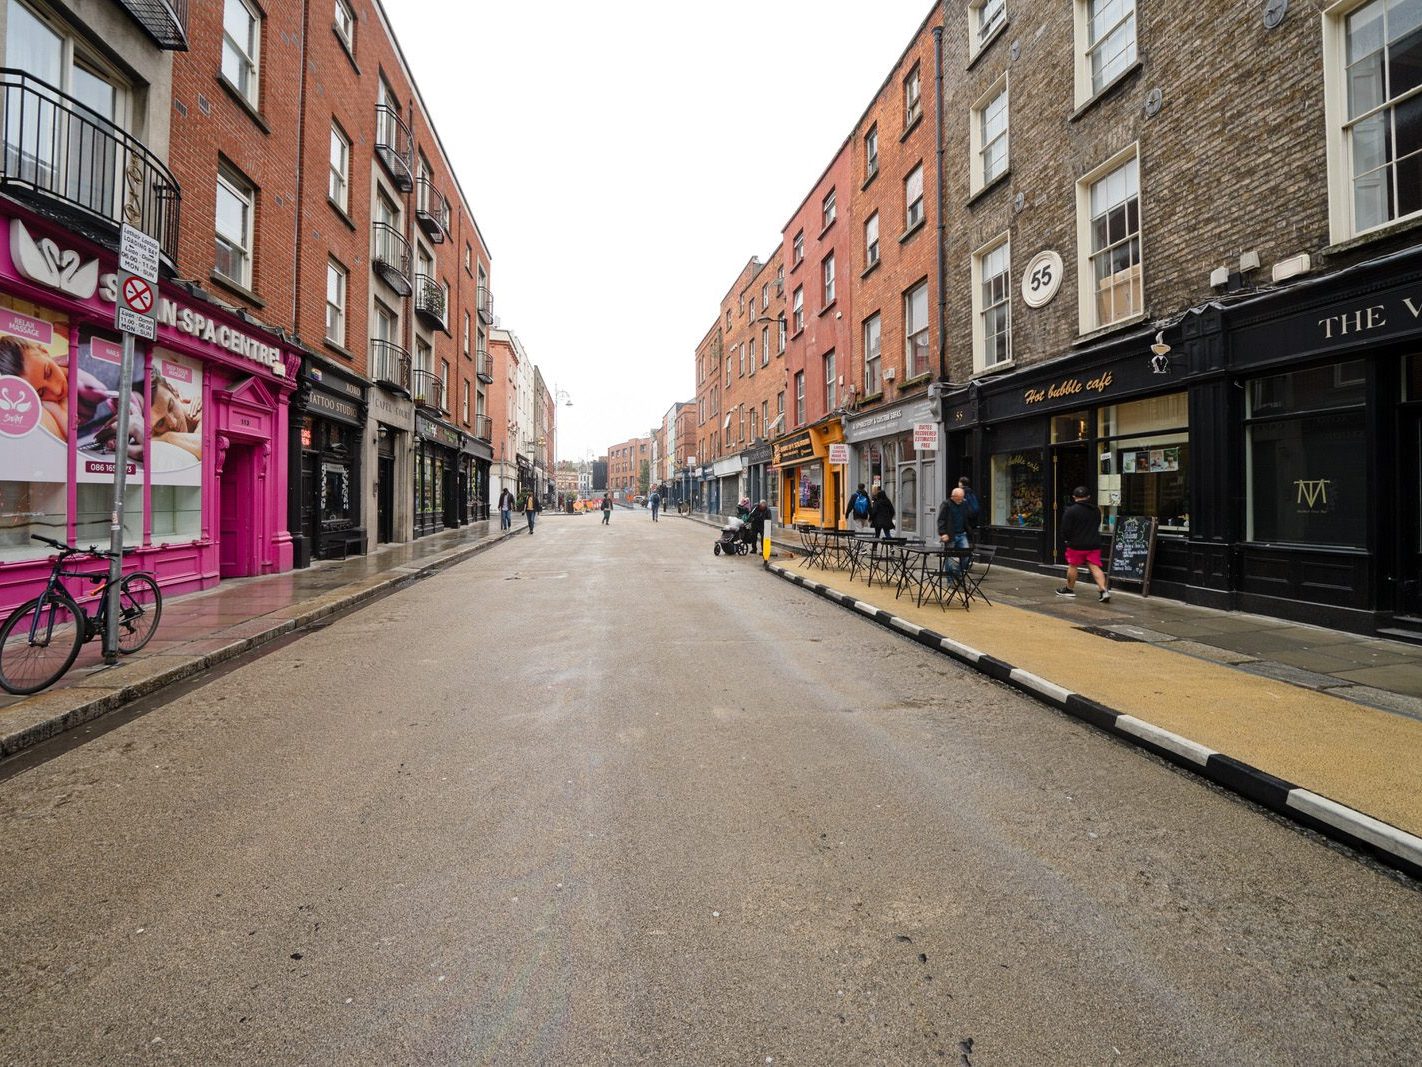 CAPEL STREET ON A DULL WET DAY [INTERIM CAPEL STREET IMPROVEMENT WORKS ARE NOW ONGOING] 030